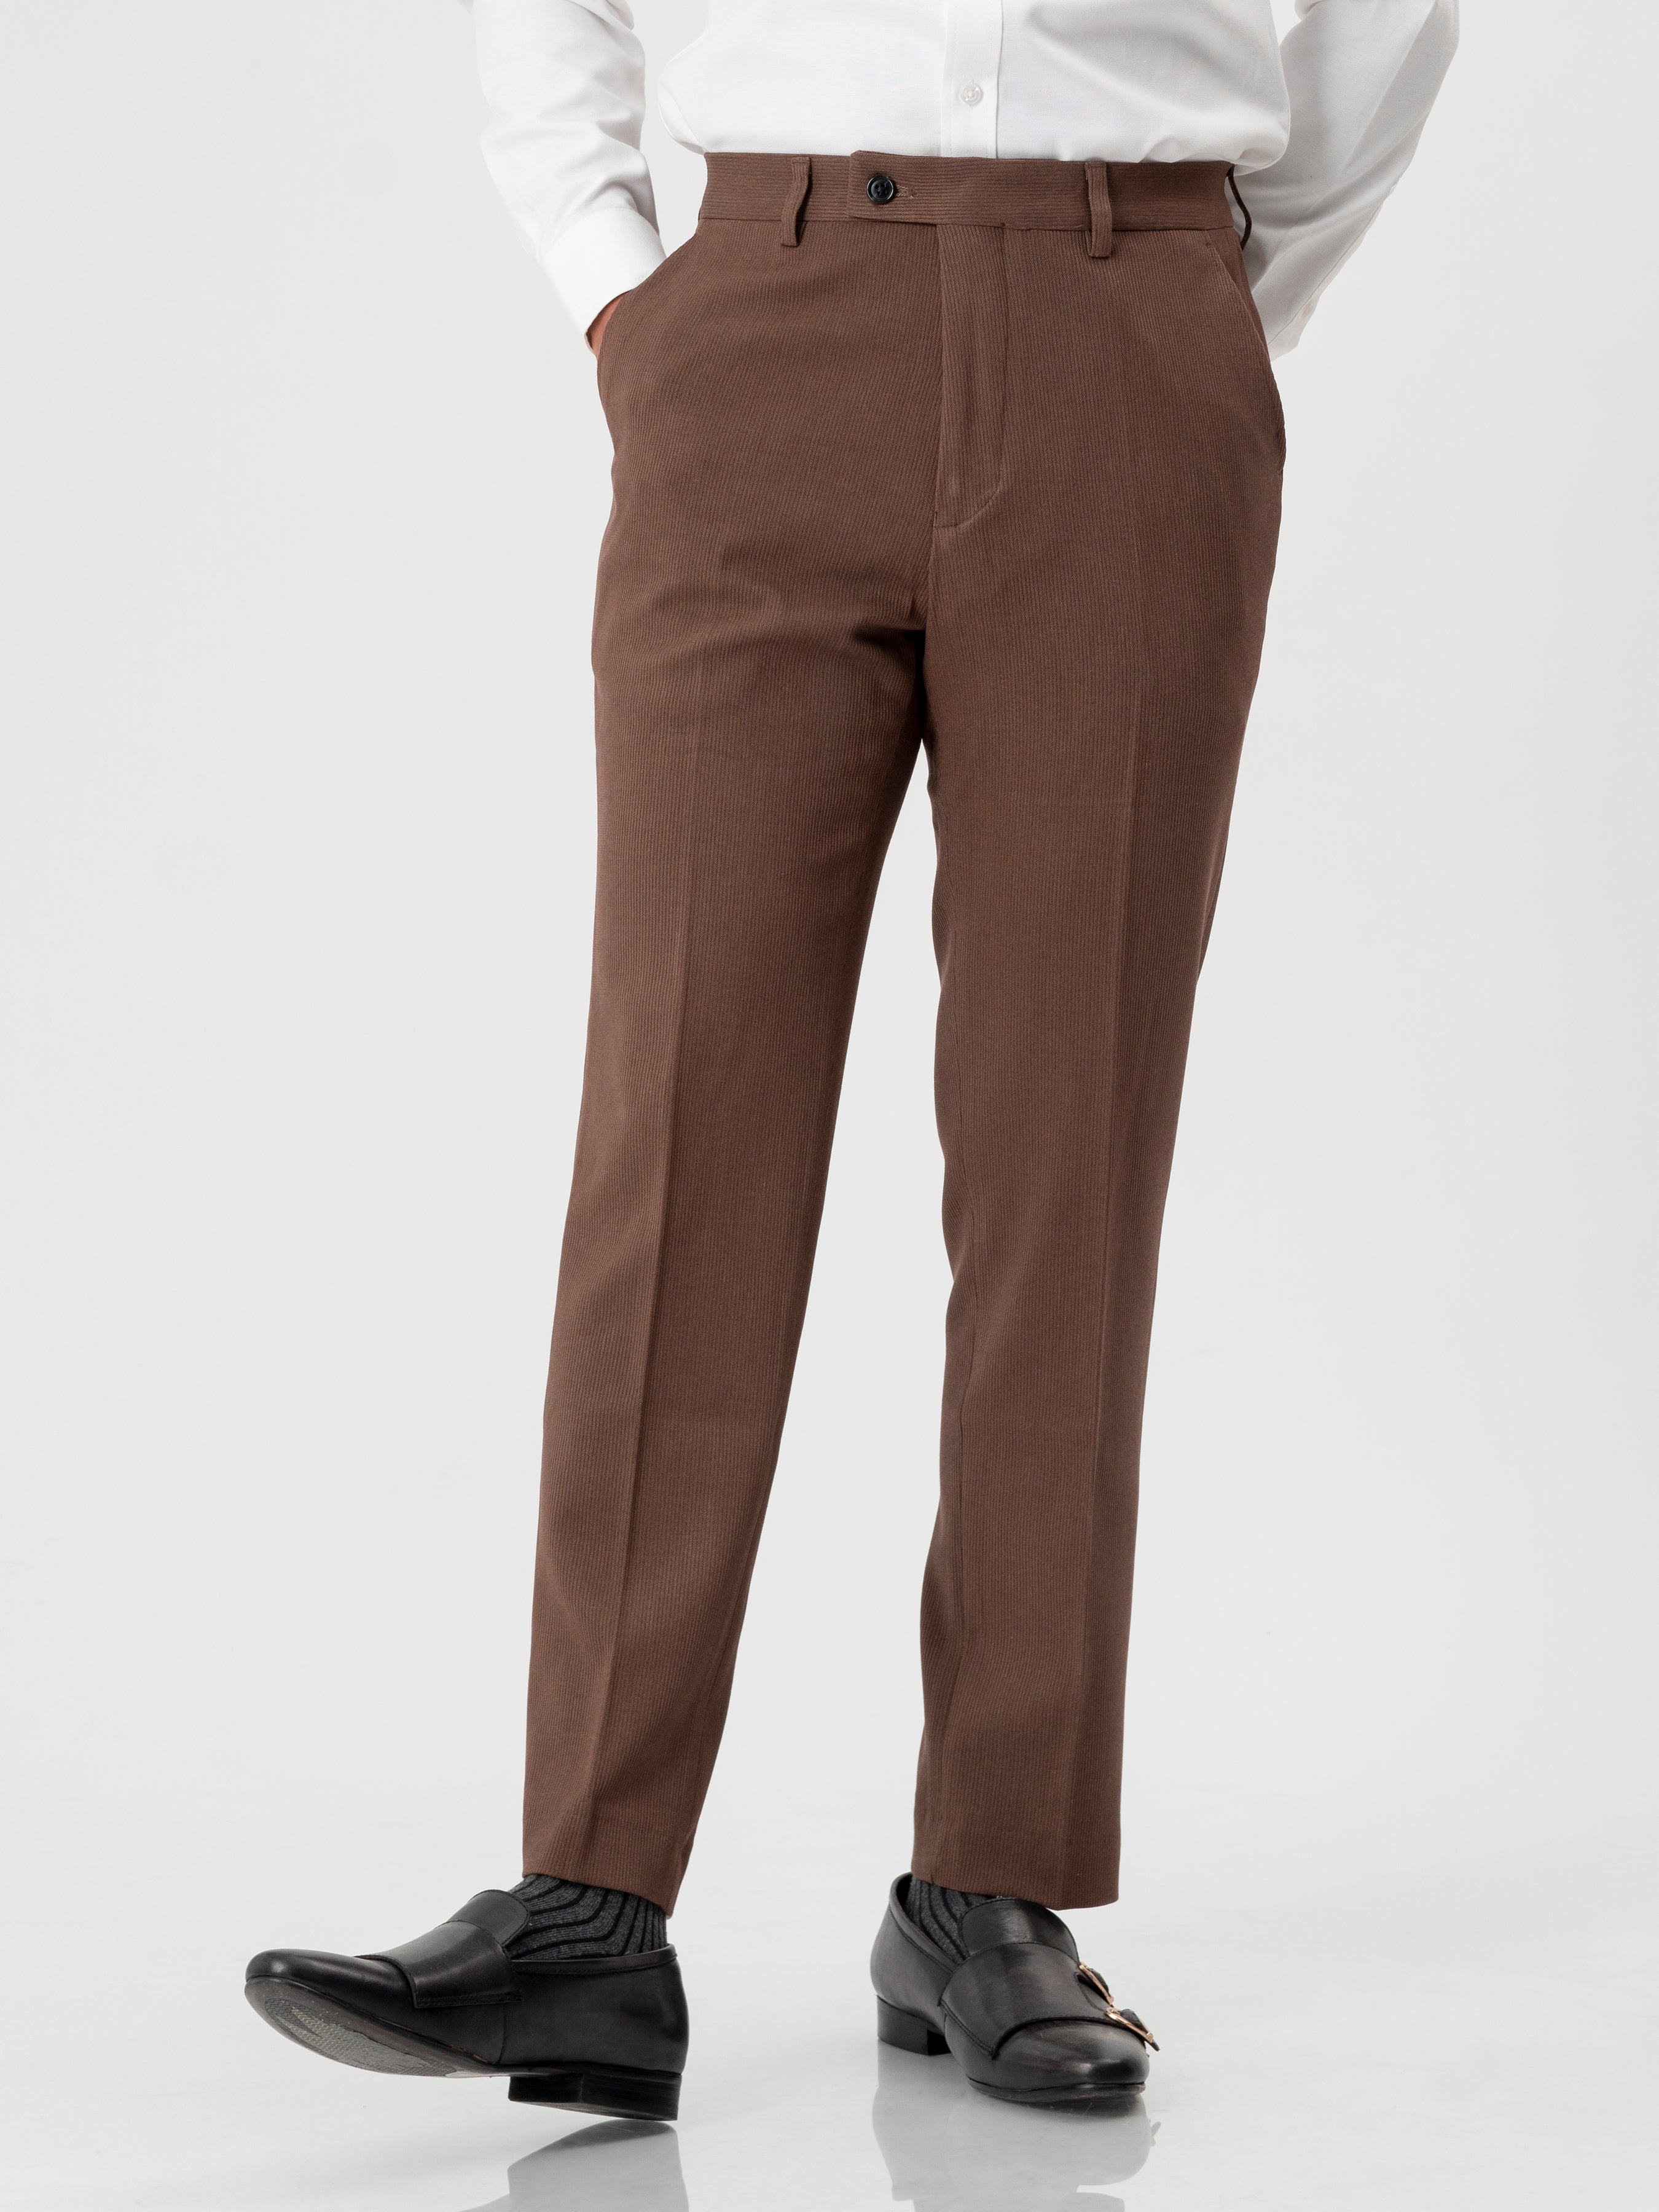 Trousers With Belt Loop - Corduroy Coffee (Stretchable)